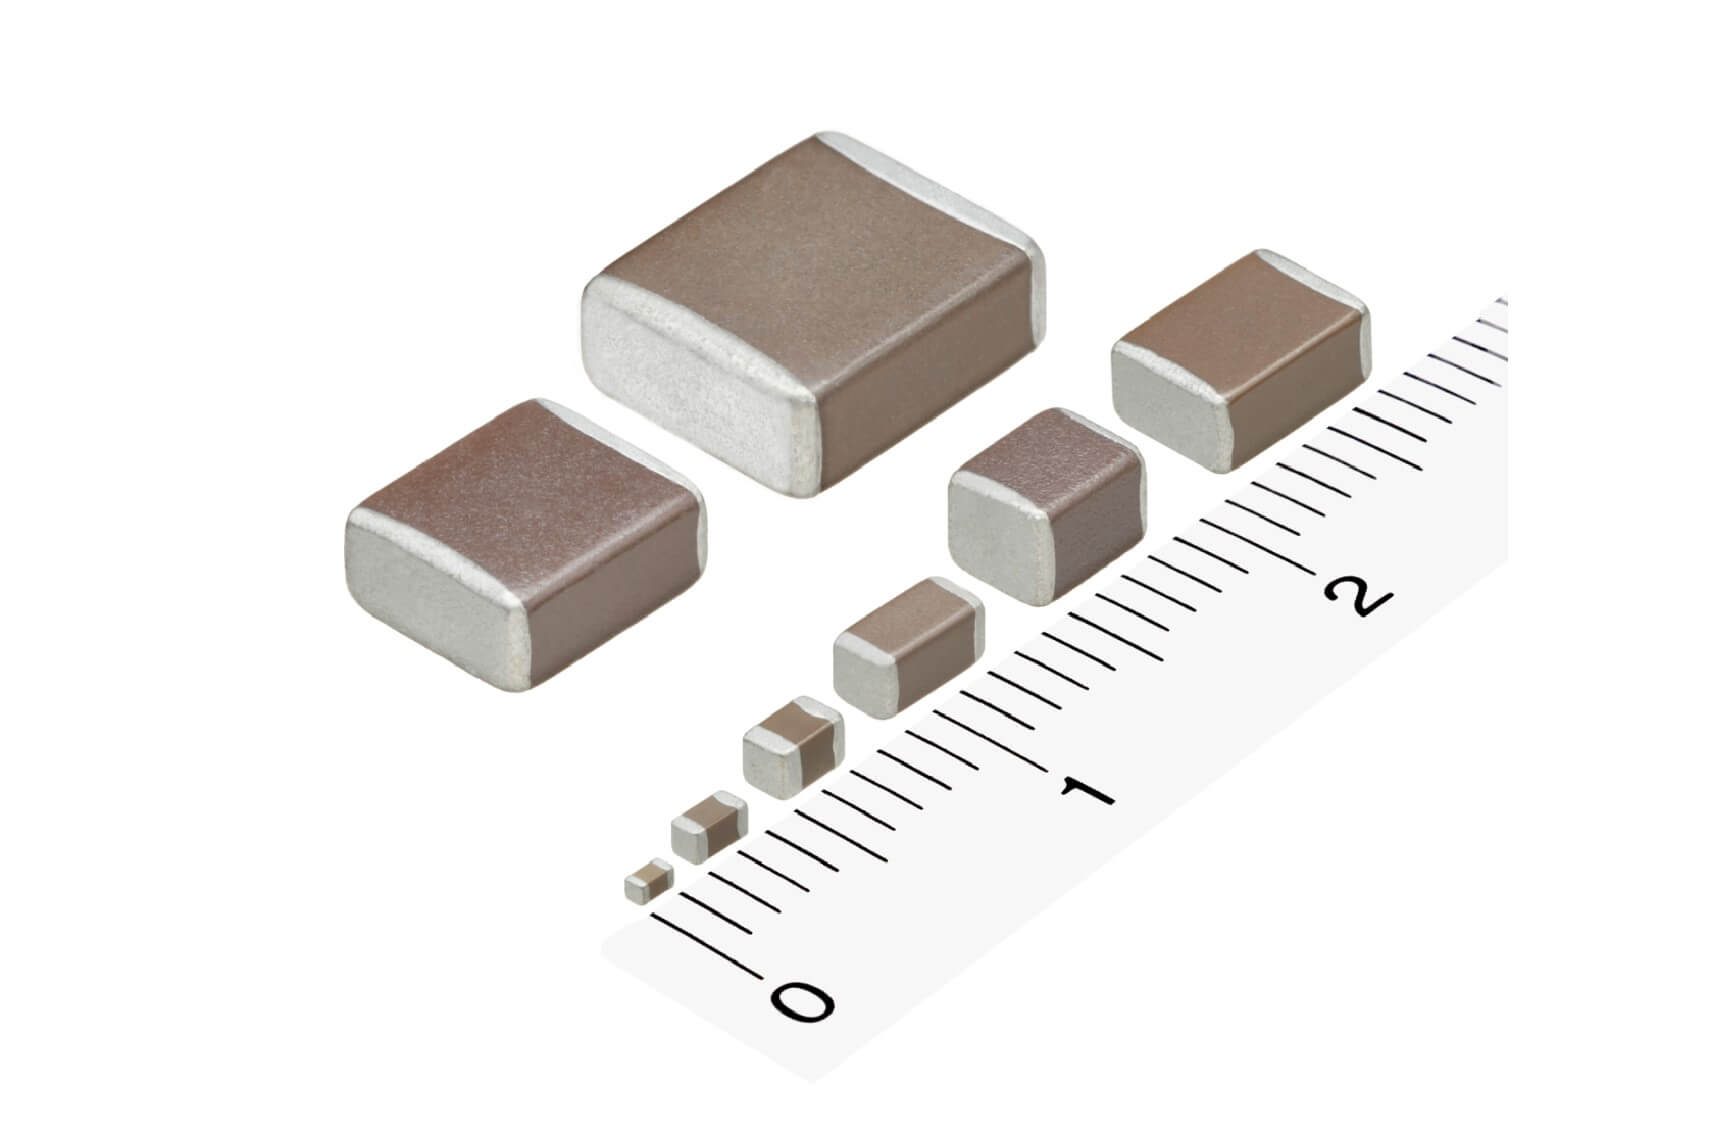 taiyo-yuden-commercializes-mlccs-with-a-maximum-operating-temperature-of-150-c-semimedia